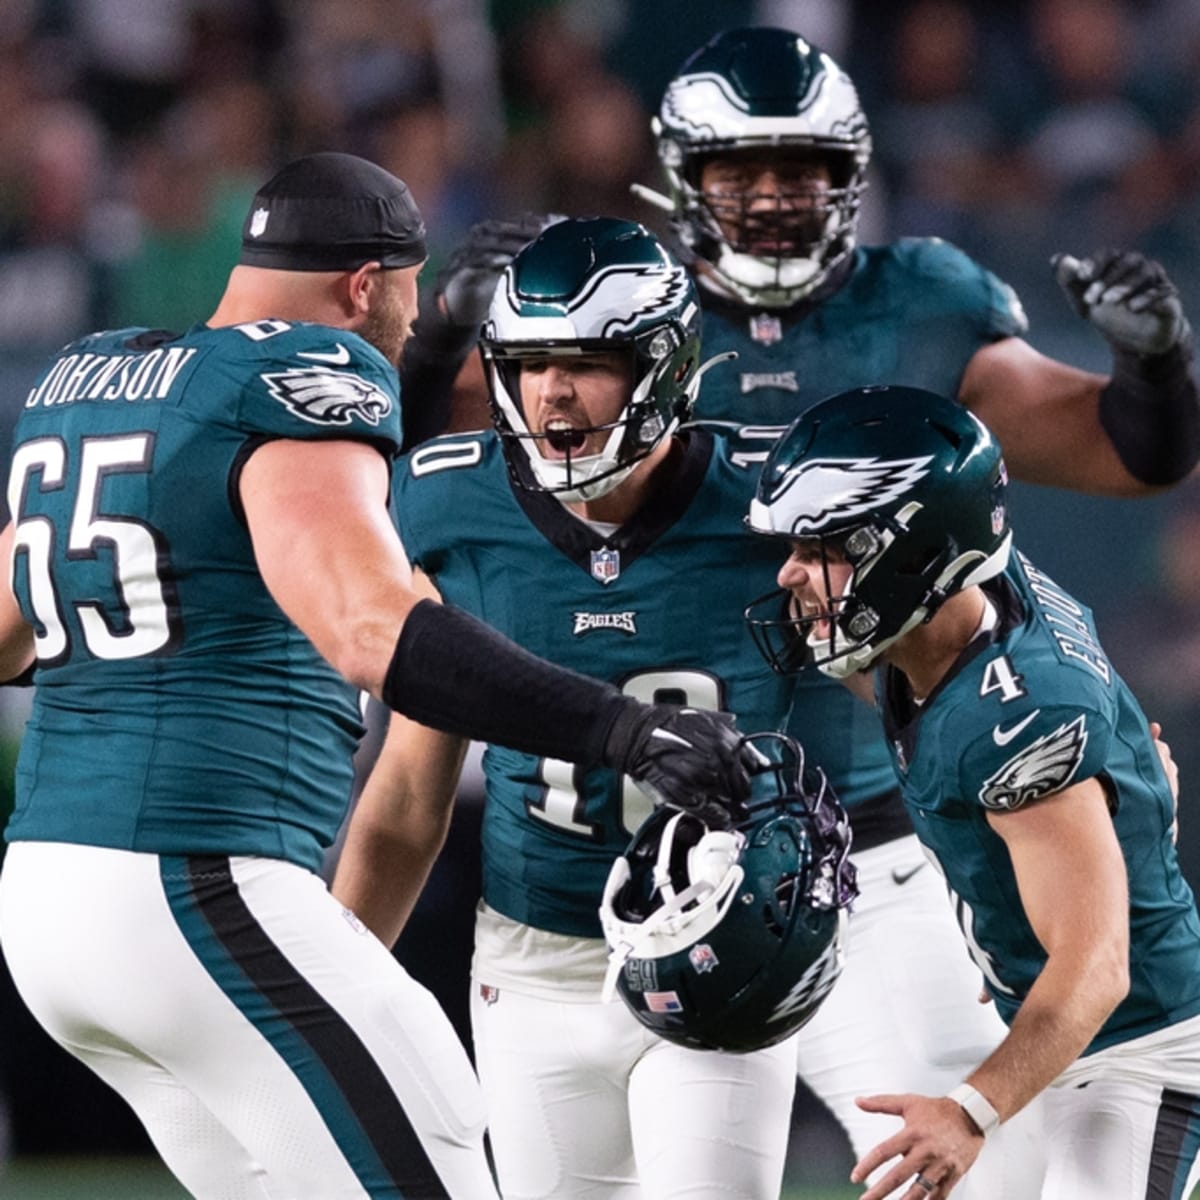 Eagles beat Vikings 34-28 as D'Andre Swift rushes for career-high